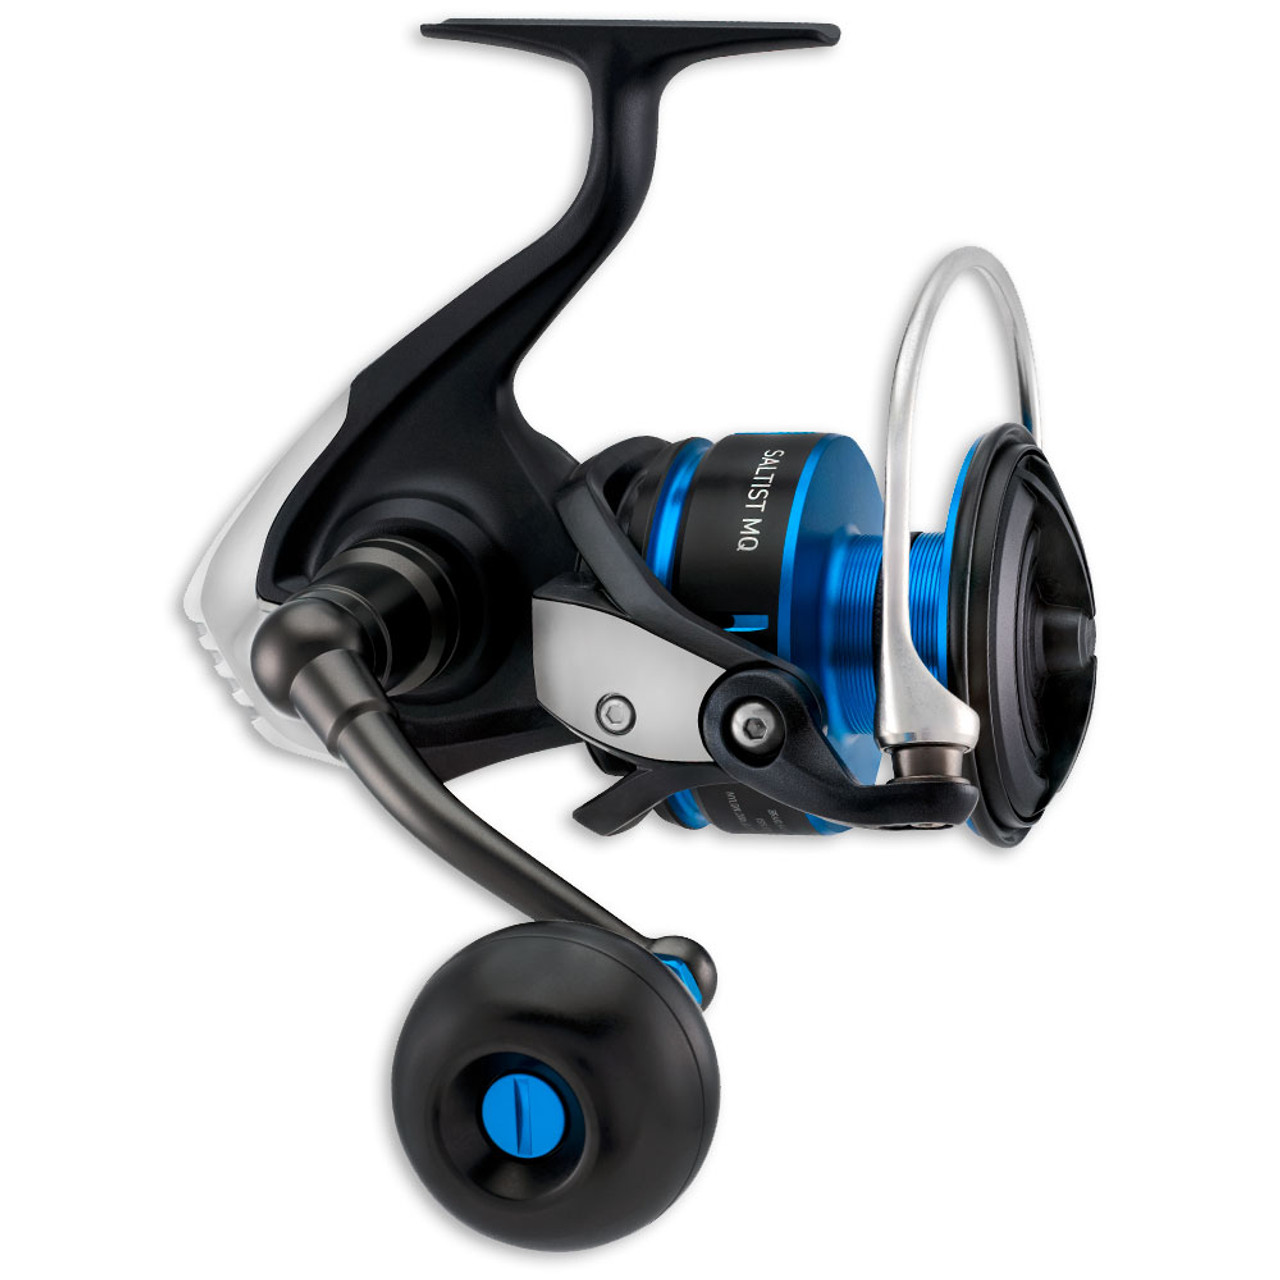 The Daiwa Saltist MQ 4000 is a really fun spinning reel to fish